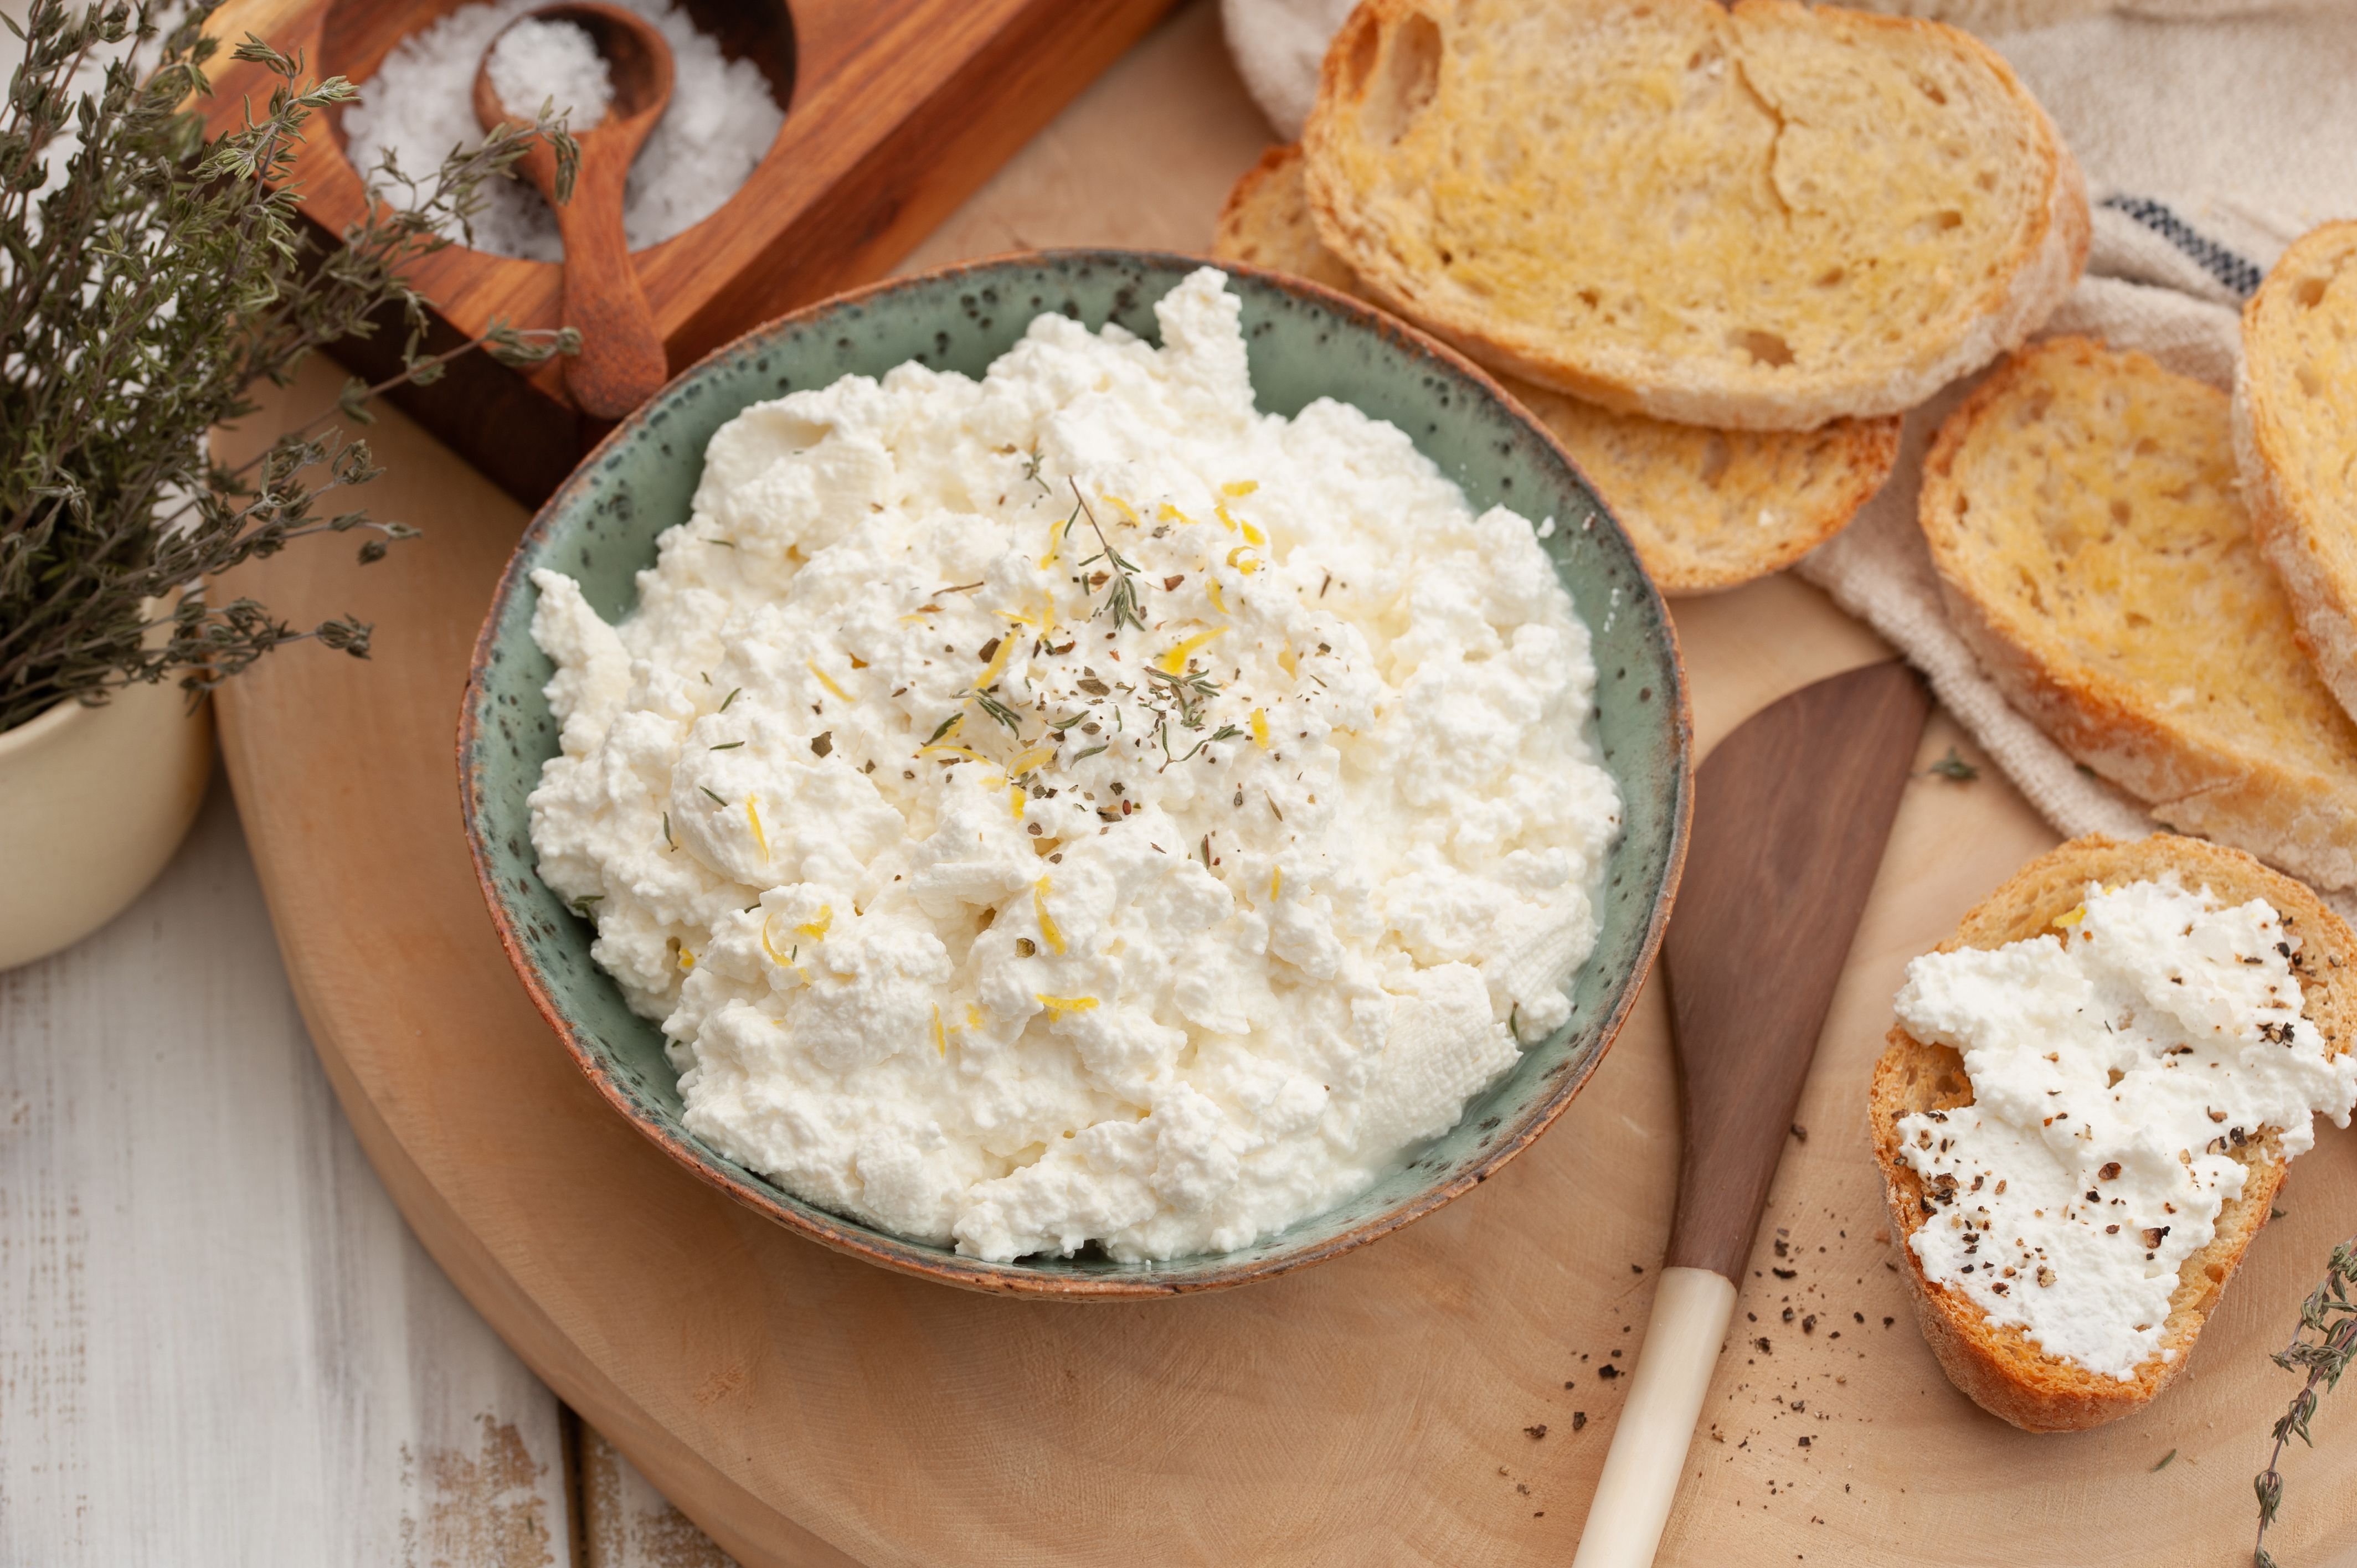 Homemade Ricotta Cheese Recipe With Buttermilk